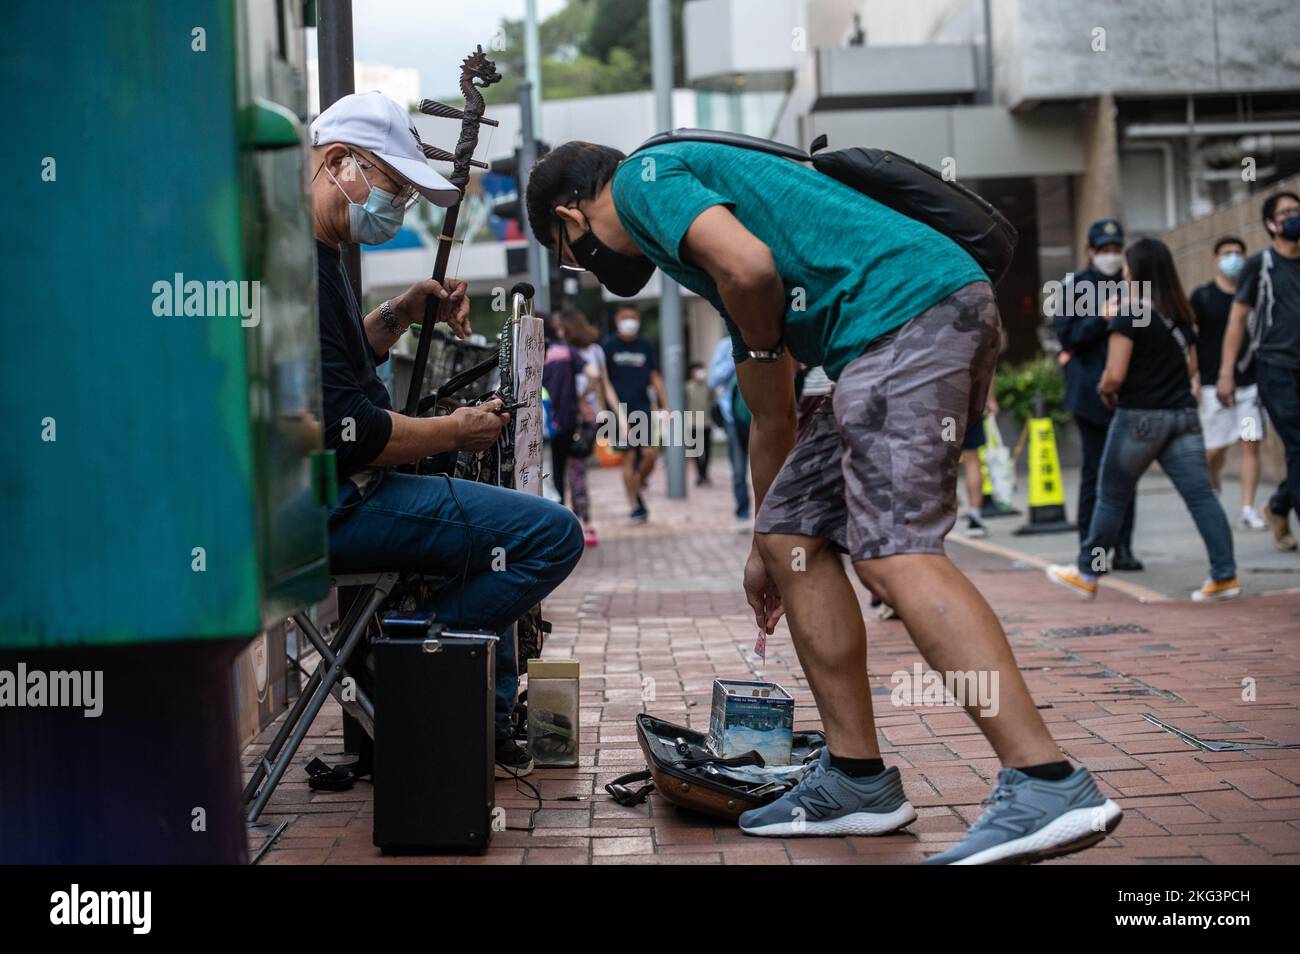 Hong Kong, China. 19th Nov, 2022. A man offers money to a musician playing 'Glory to Hong Kong' and 'Do You Here The People Sing?' on an erhu in front of Quarry Bay Station in Hong Kong. 'Glory to Hong Kong', considered an unofficial anthem of the 2019 pro-democracy protests, has made headlines lately due to it being mistaken for the actual Chinese national anthem at multiple international rugby events. In Hong Kong, questions persist as to the legality of playing or performing this song in public under the National Security Law. Credit: SOPA Images Limited/Alamy Live News Stock Photo